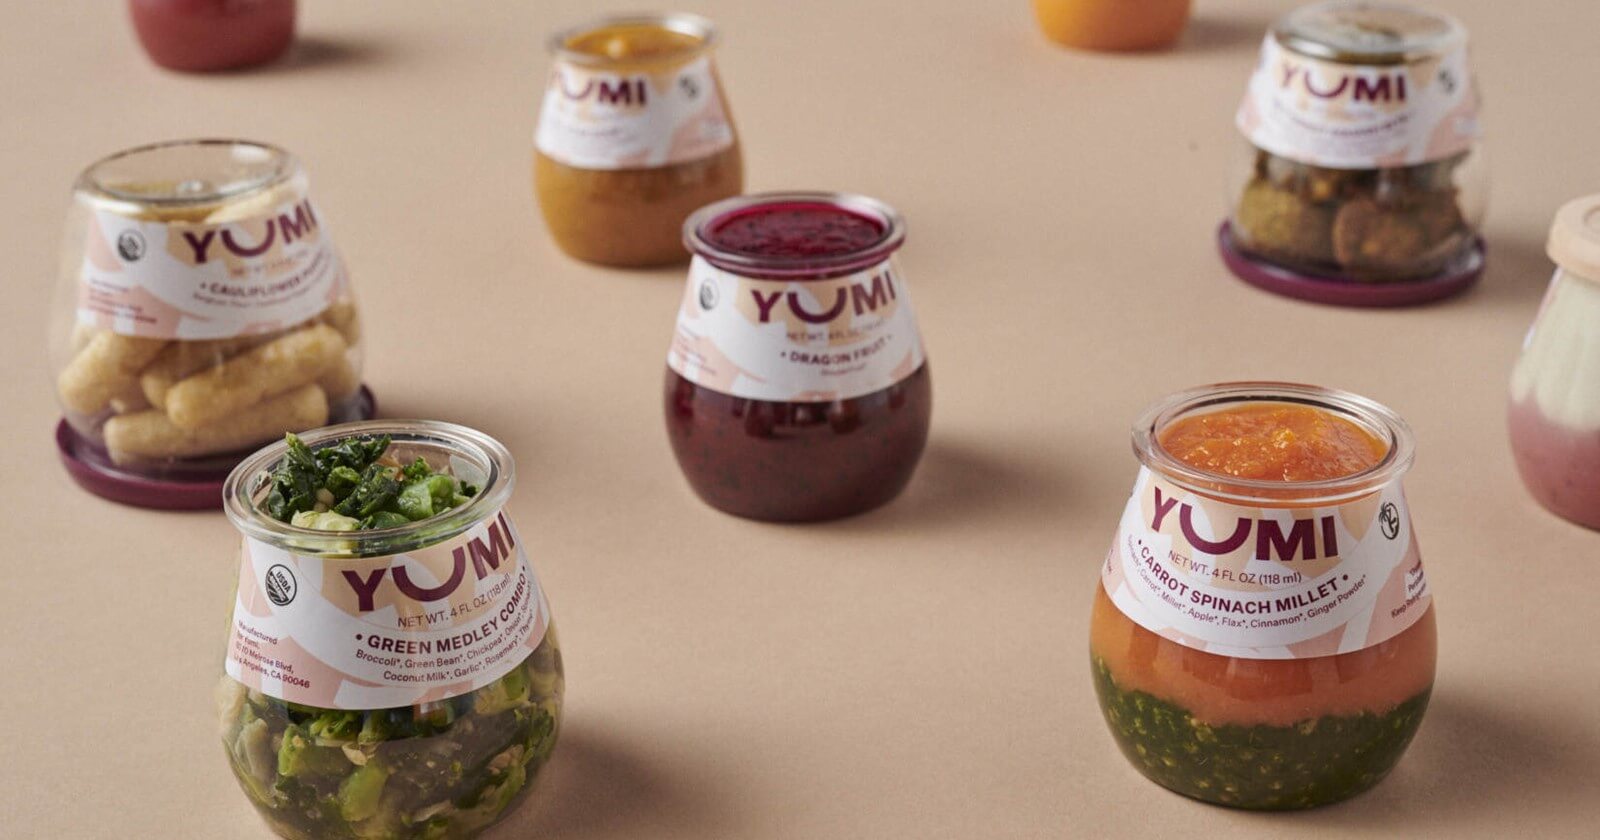 Collaborations Licensing Announces Representation of Nation’s Fastest Growing Baby Food Brand, Yumi image